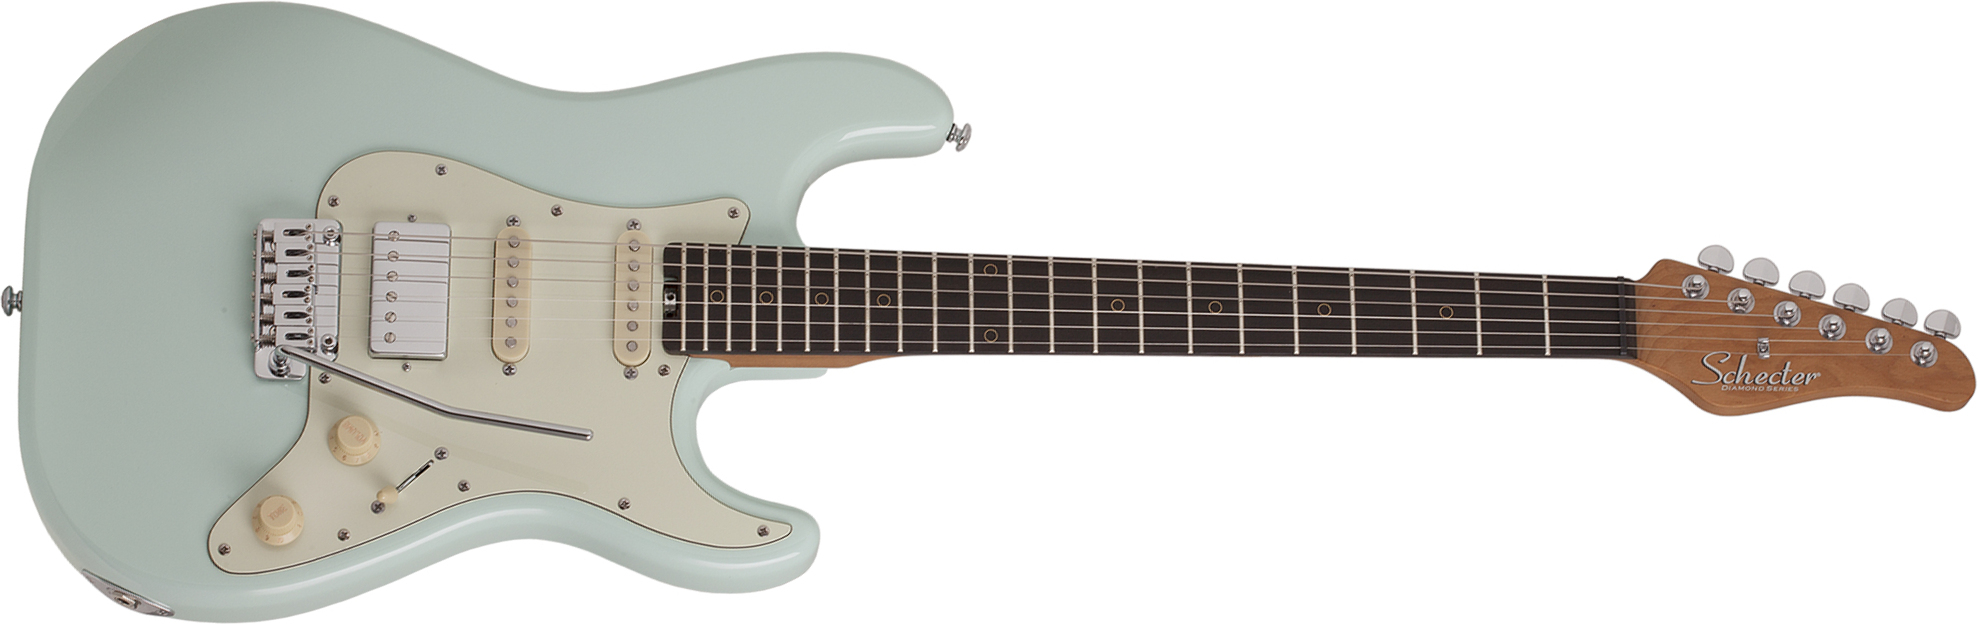 Schecter Nick Johnston Traditional Hss Trem Eb - Atomic Frost - E-Gitarre in Str-Form - Main picture